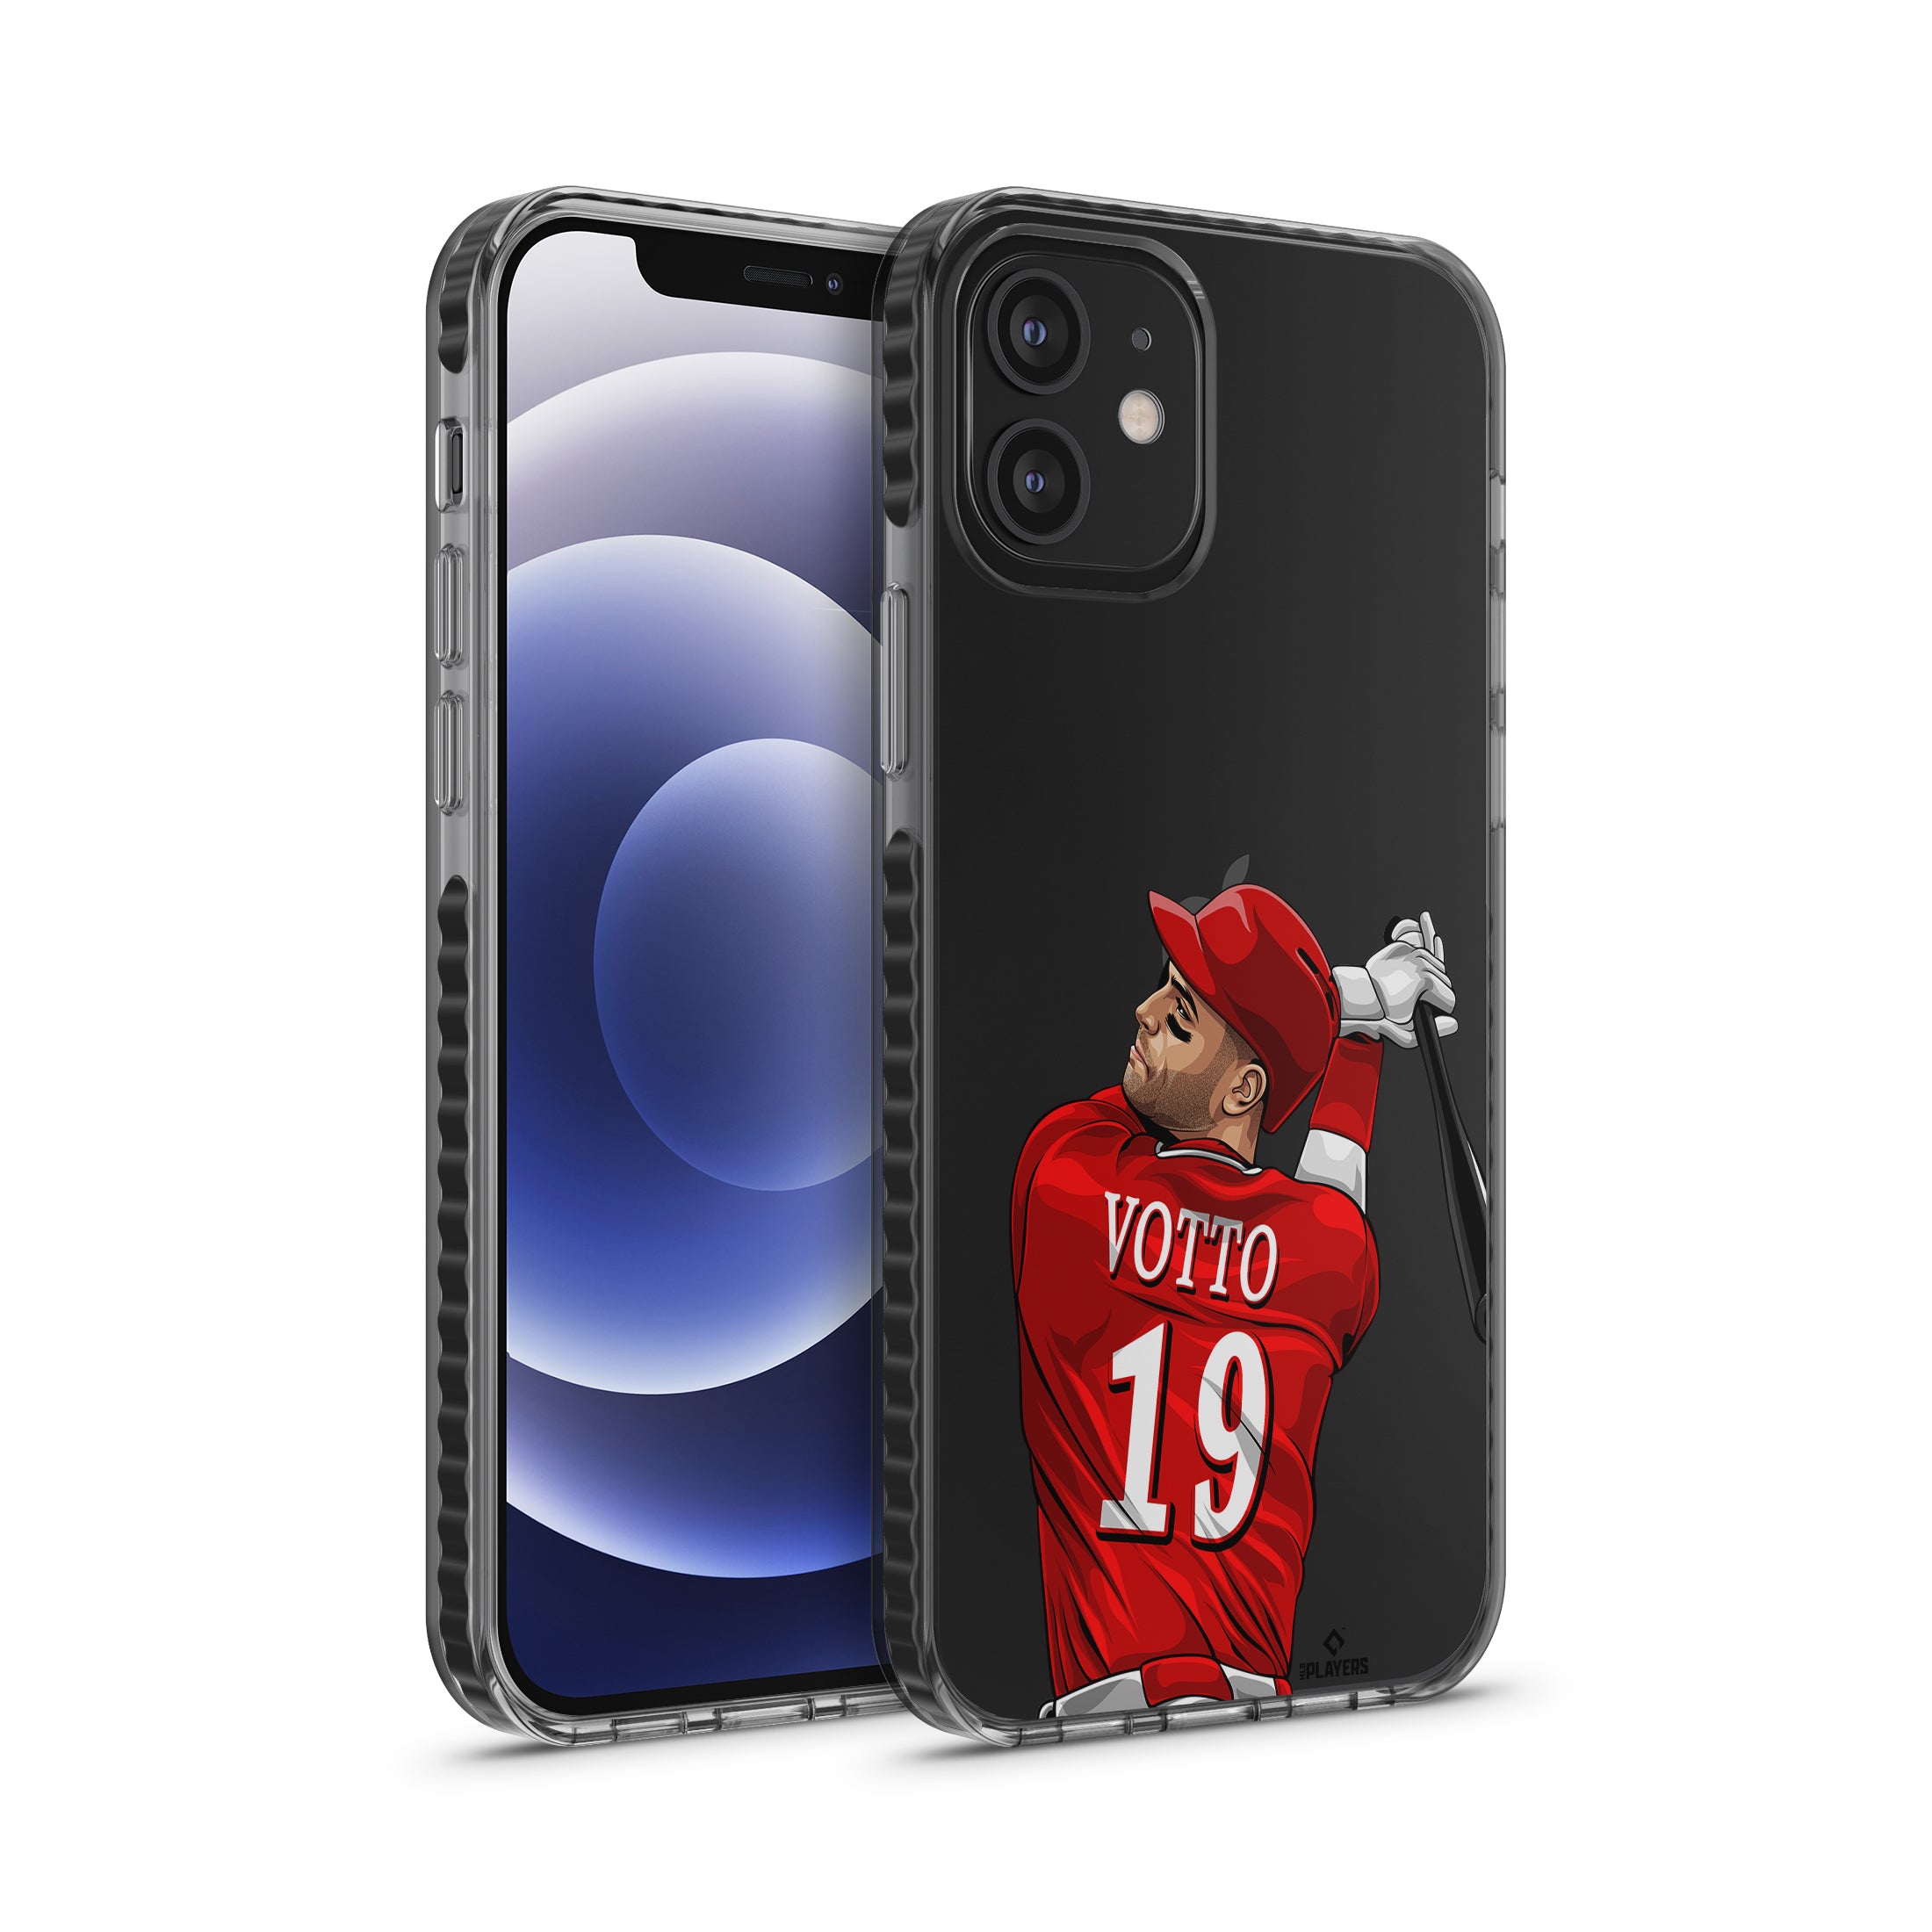 Votto Clear Series 2.0 Phone Case